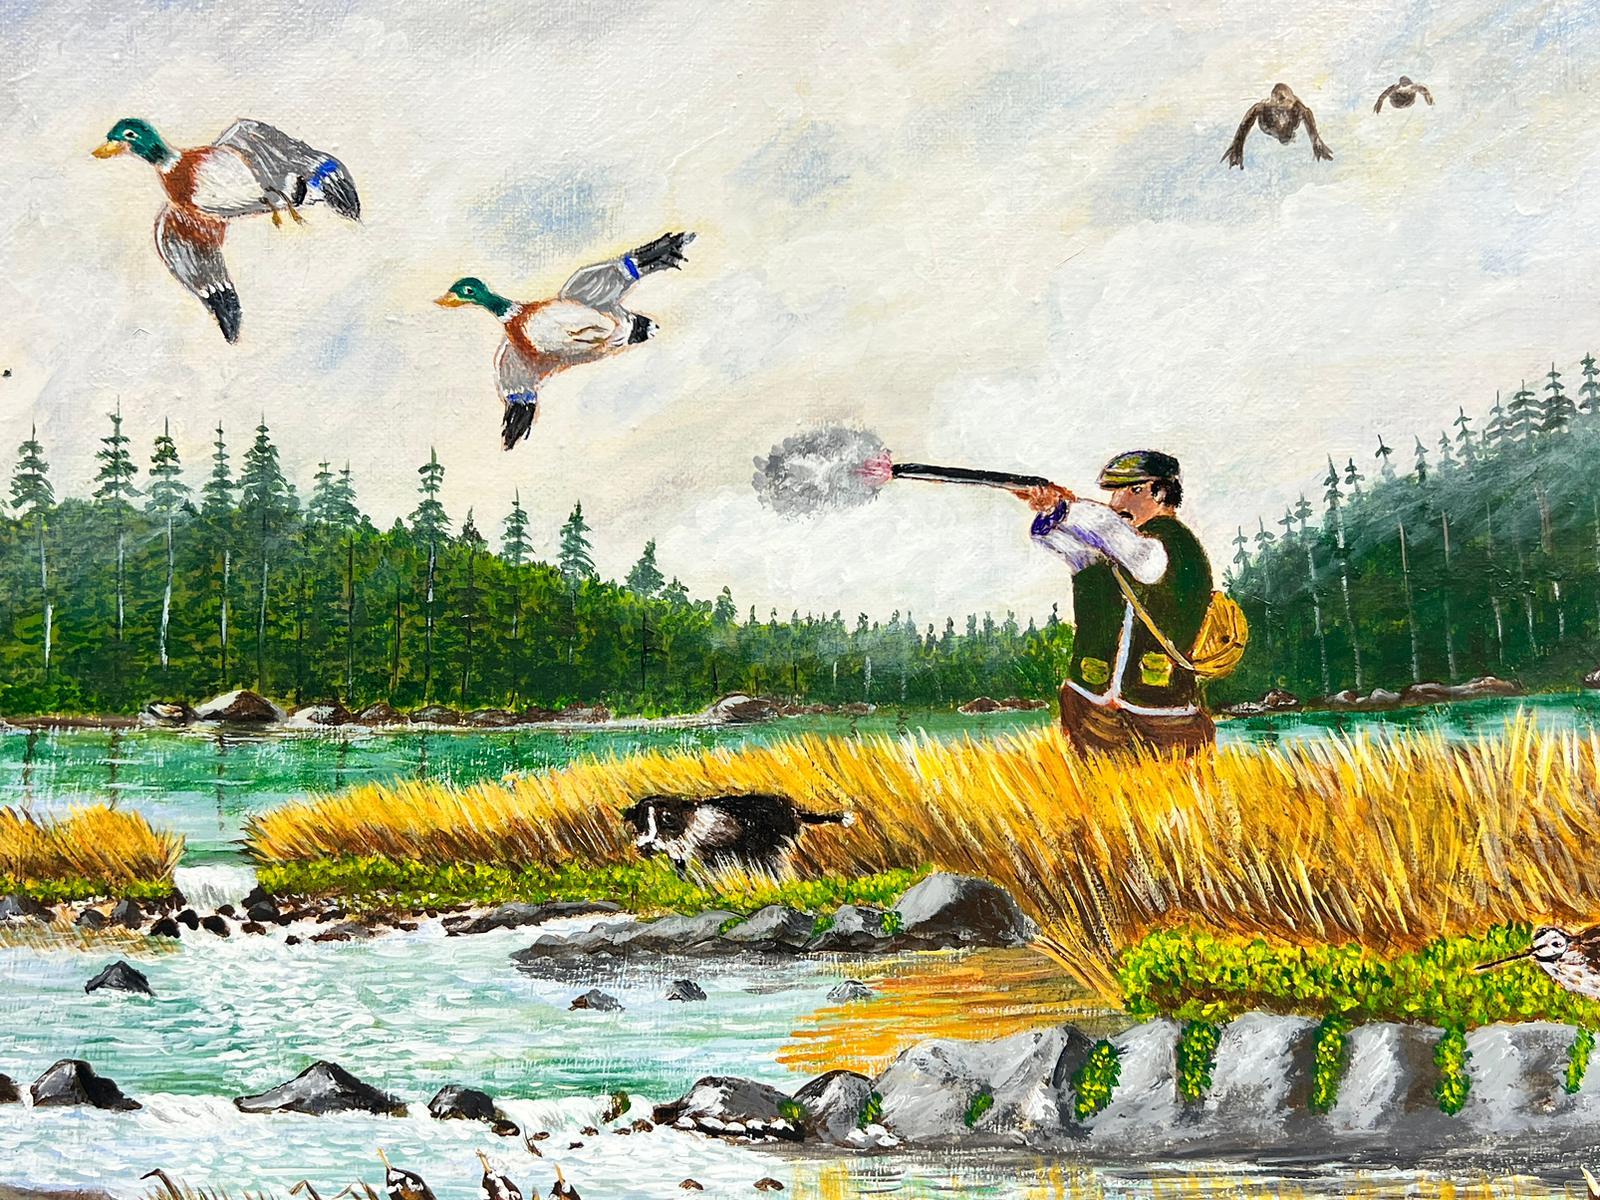 Duck Shooting
by Ben George Powell, British contemporary artist
signed 
acrylic on canvas, unframed
canvas: 15 x 20 inches
provenance: private collection of this artists work, UK
The painting is in very good and presentable condition.
